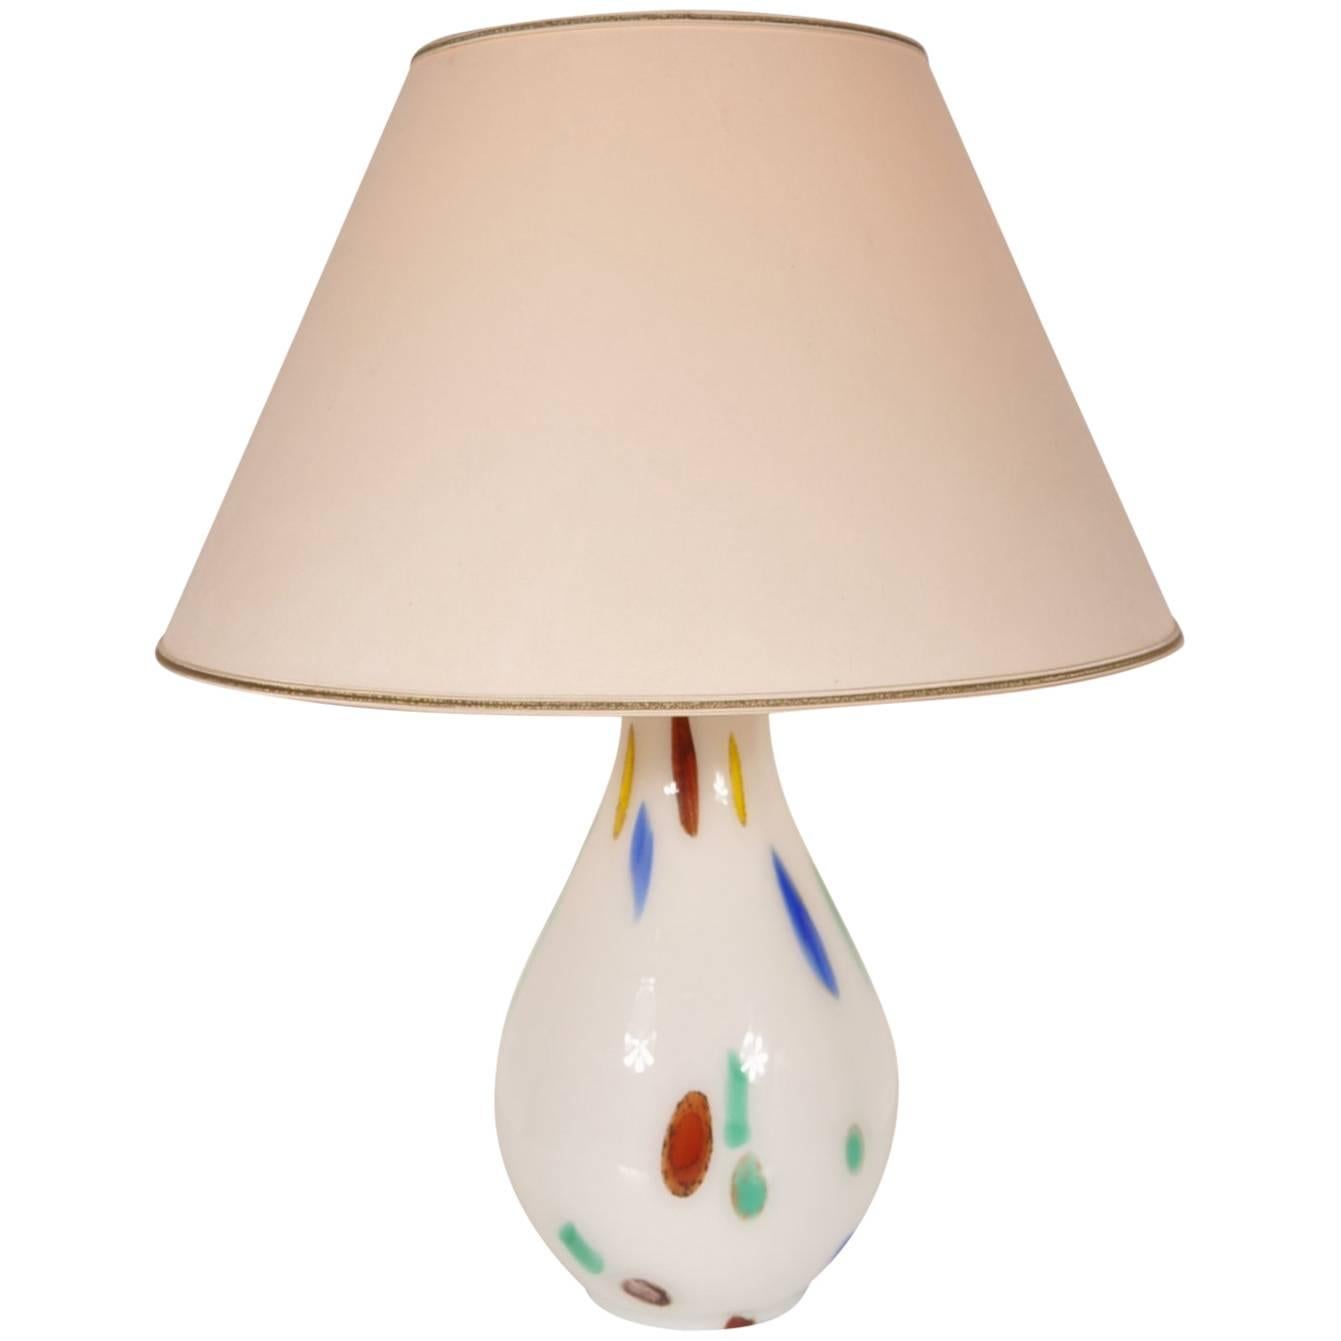 Murano Glass Table Lamp by Dino Martens for Aureliano Toso, Italy, circa 1960